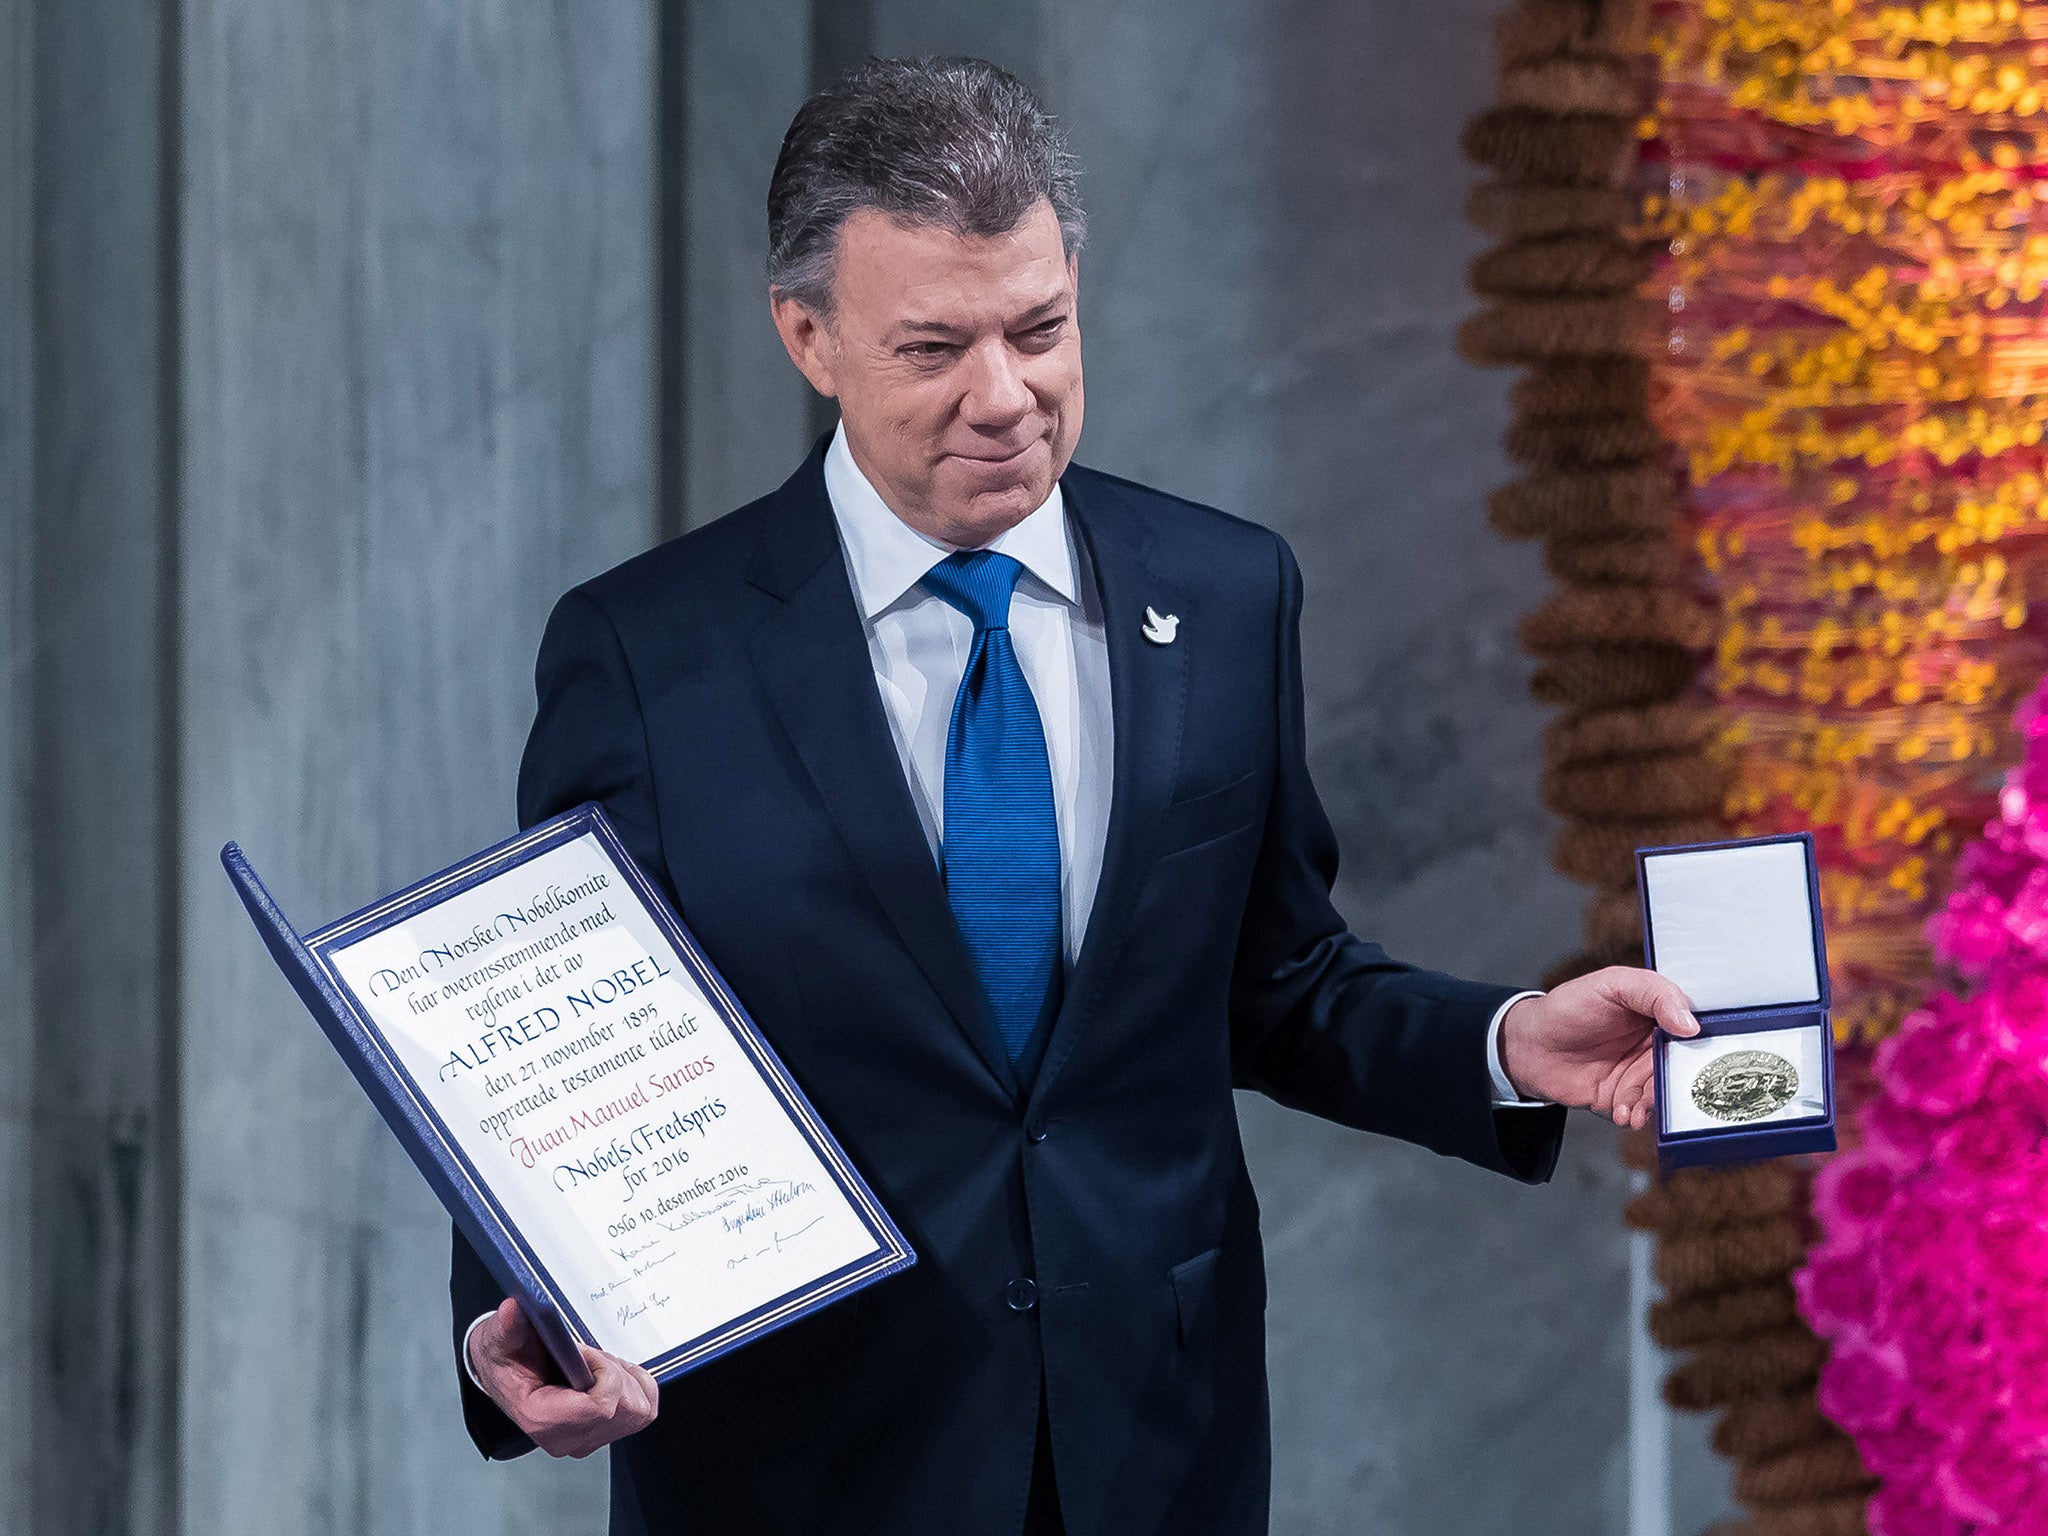 President Juan Manuel Santos of Colombia with his Nobel Peace Prize at Oslo Town Hall